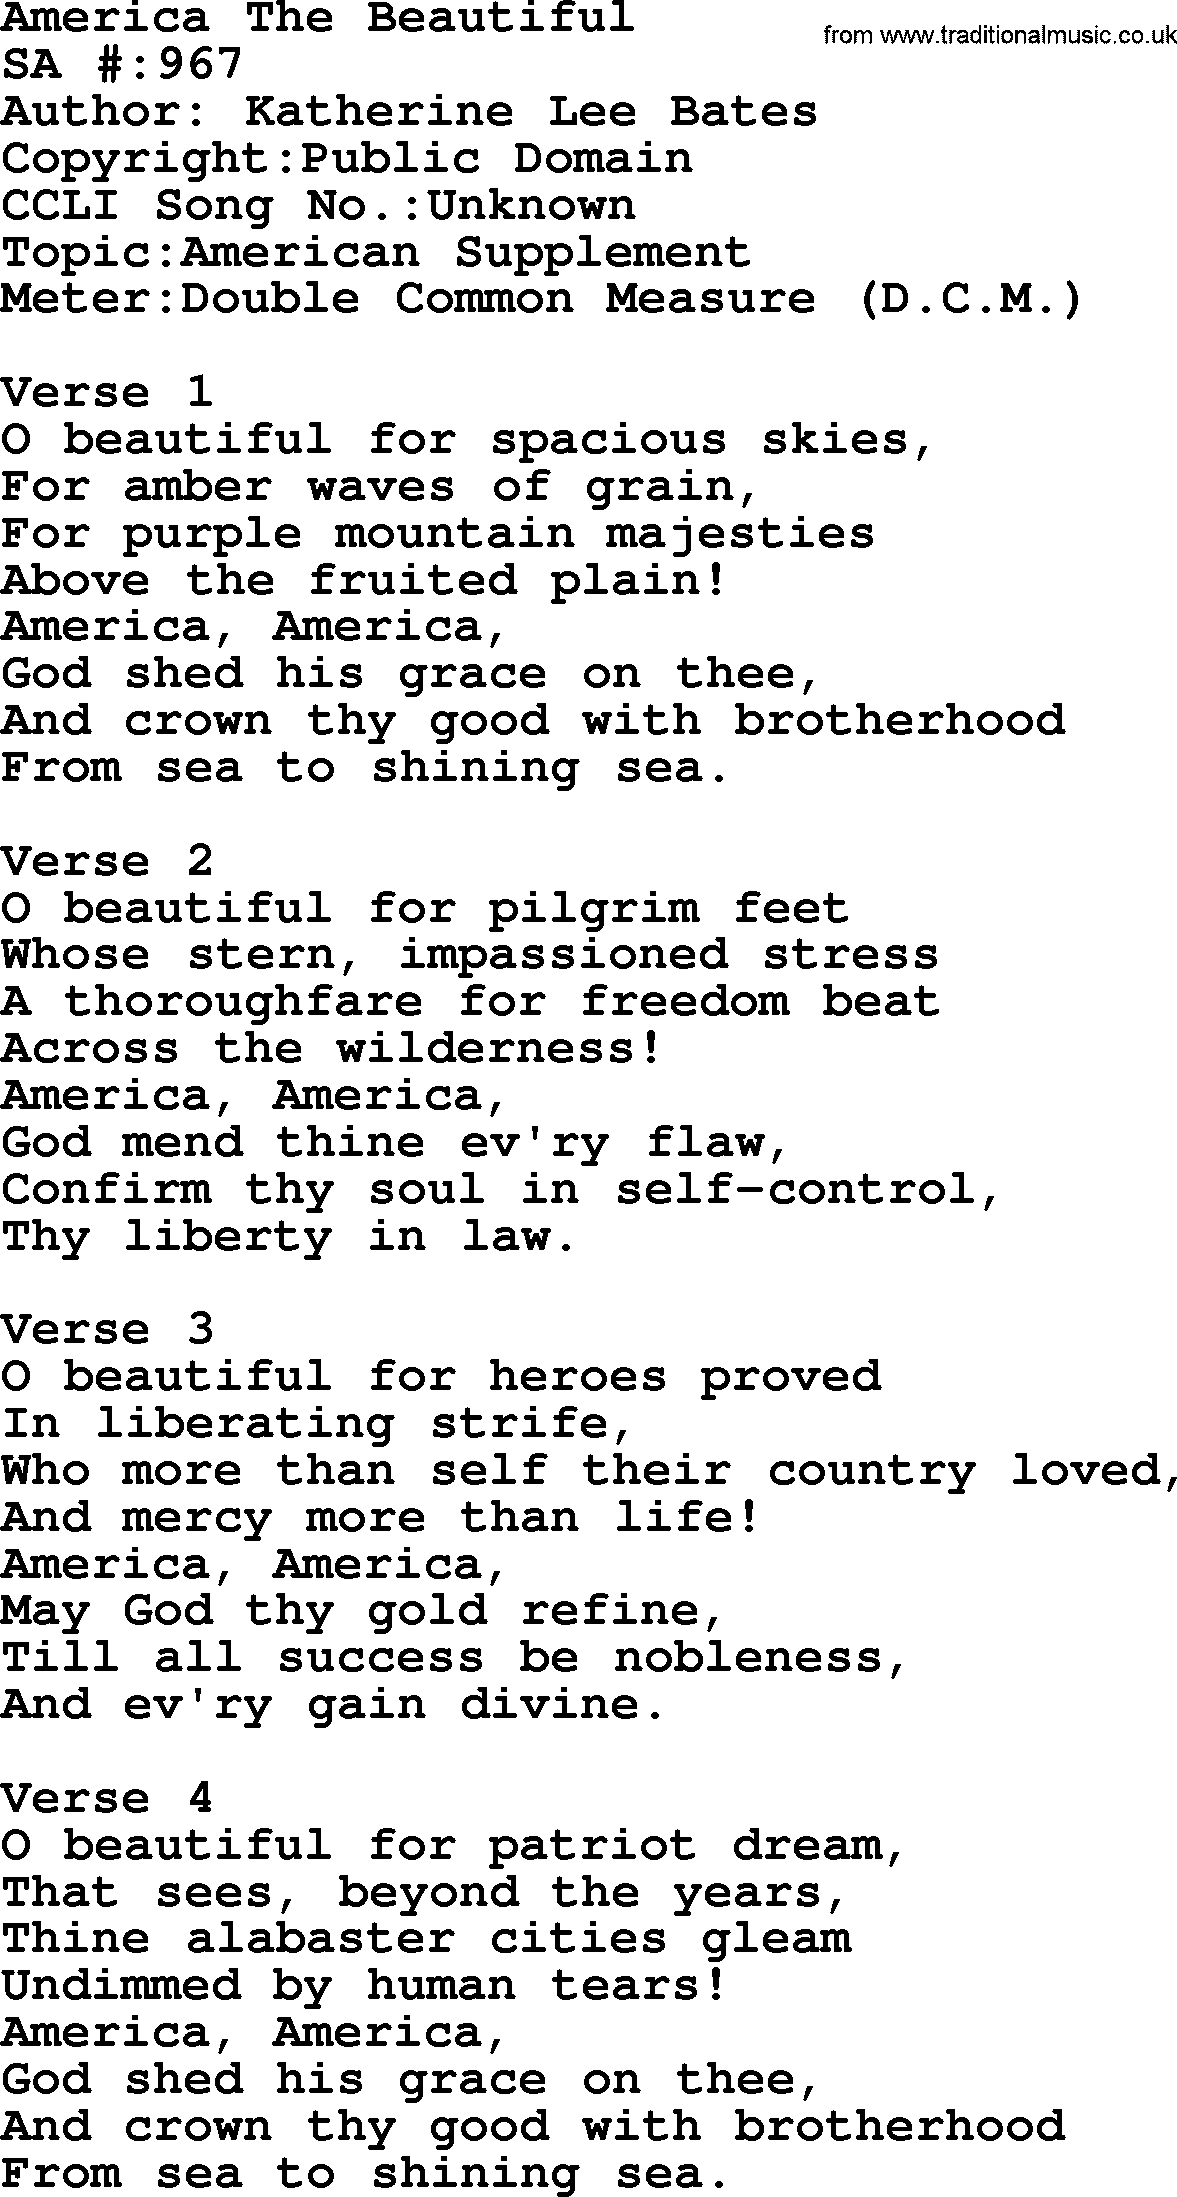 Salvation Army Hymnal, title: America The Beautiful, with lyrics and PDF,